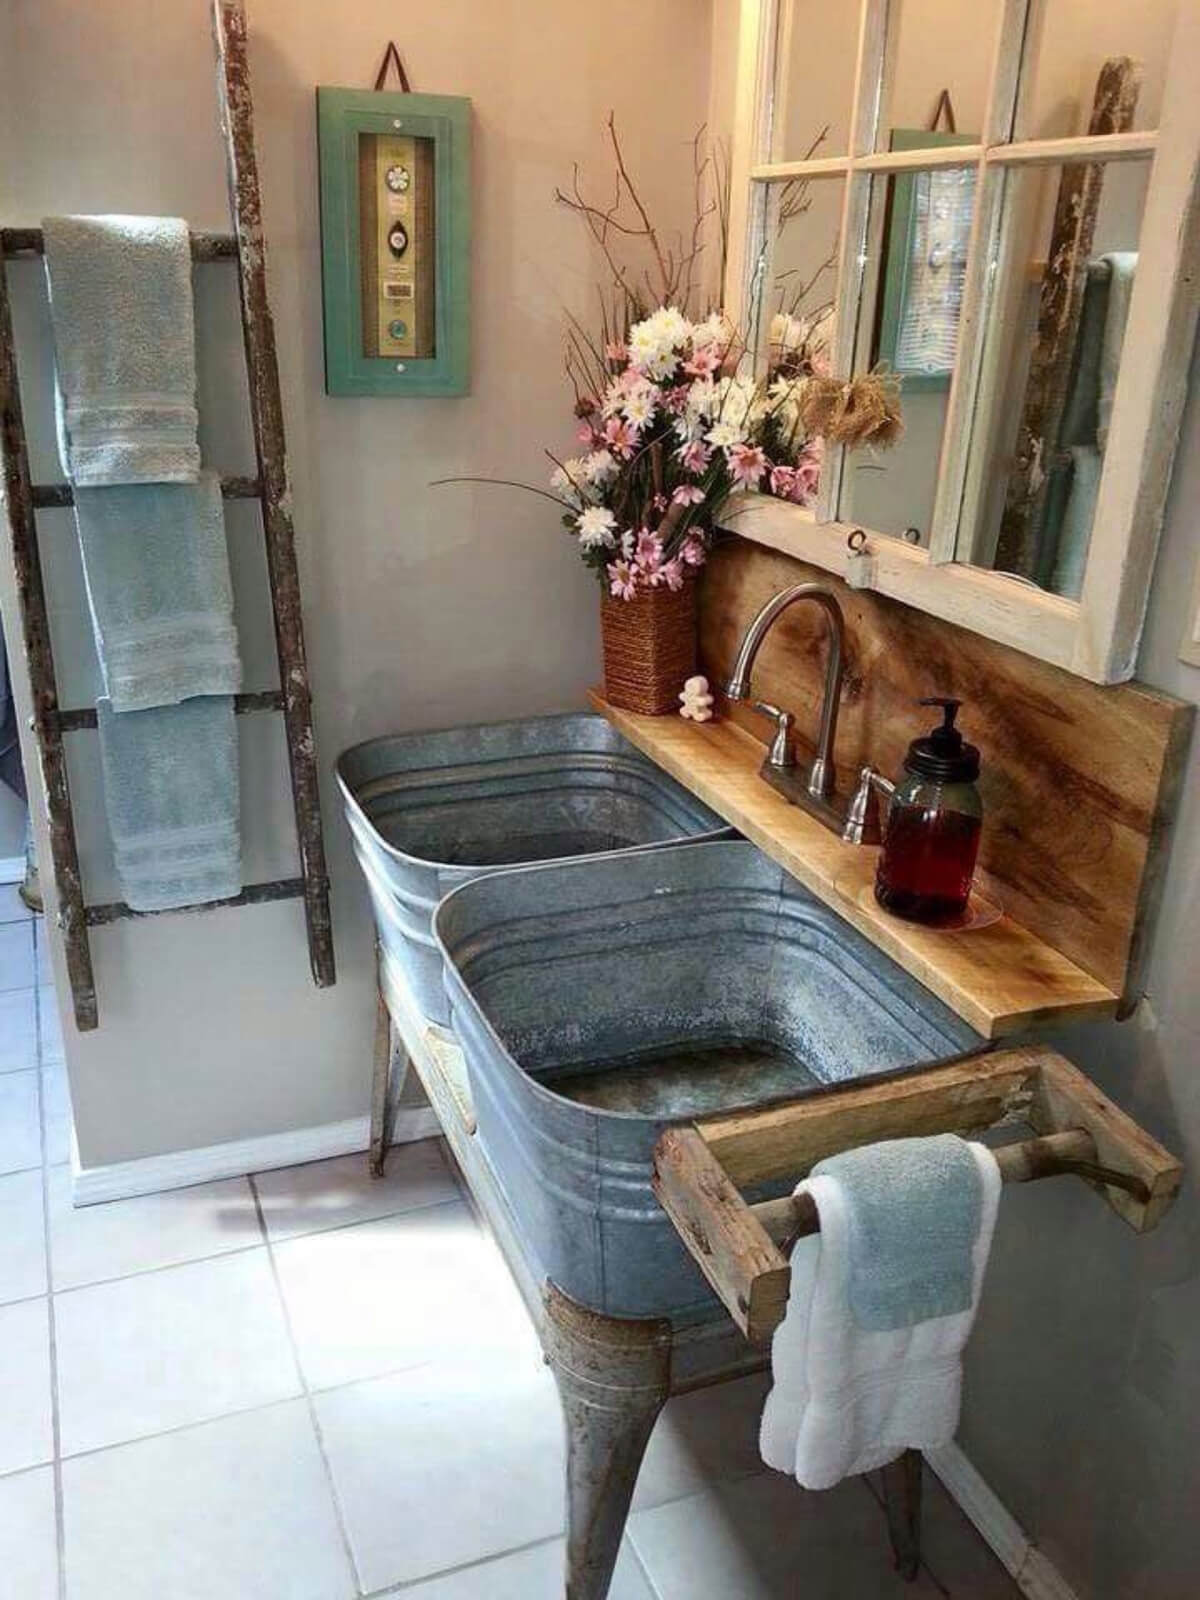 Classic Rustic Style Sink